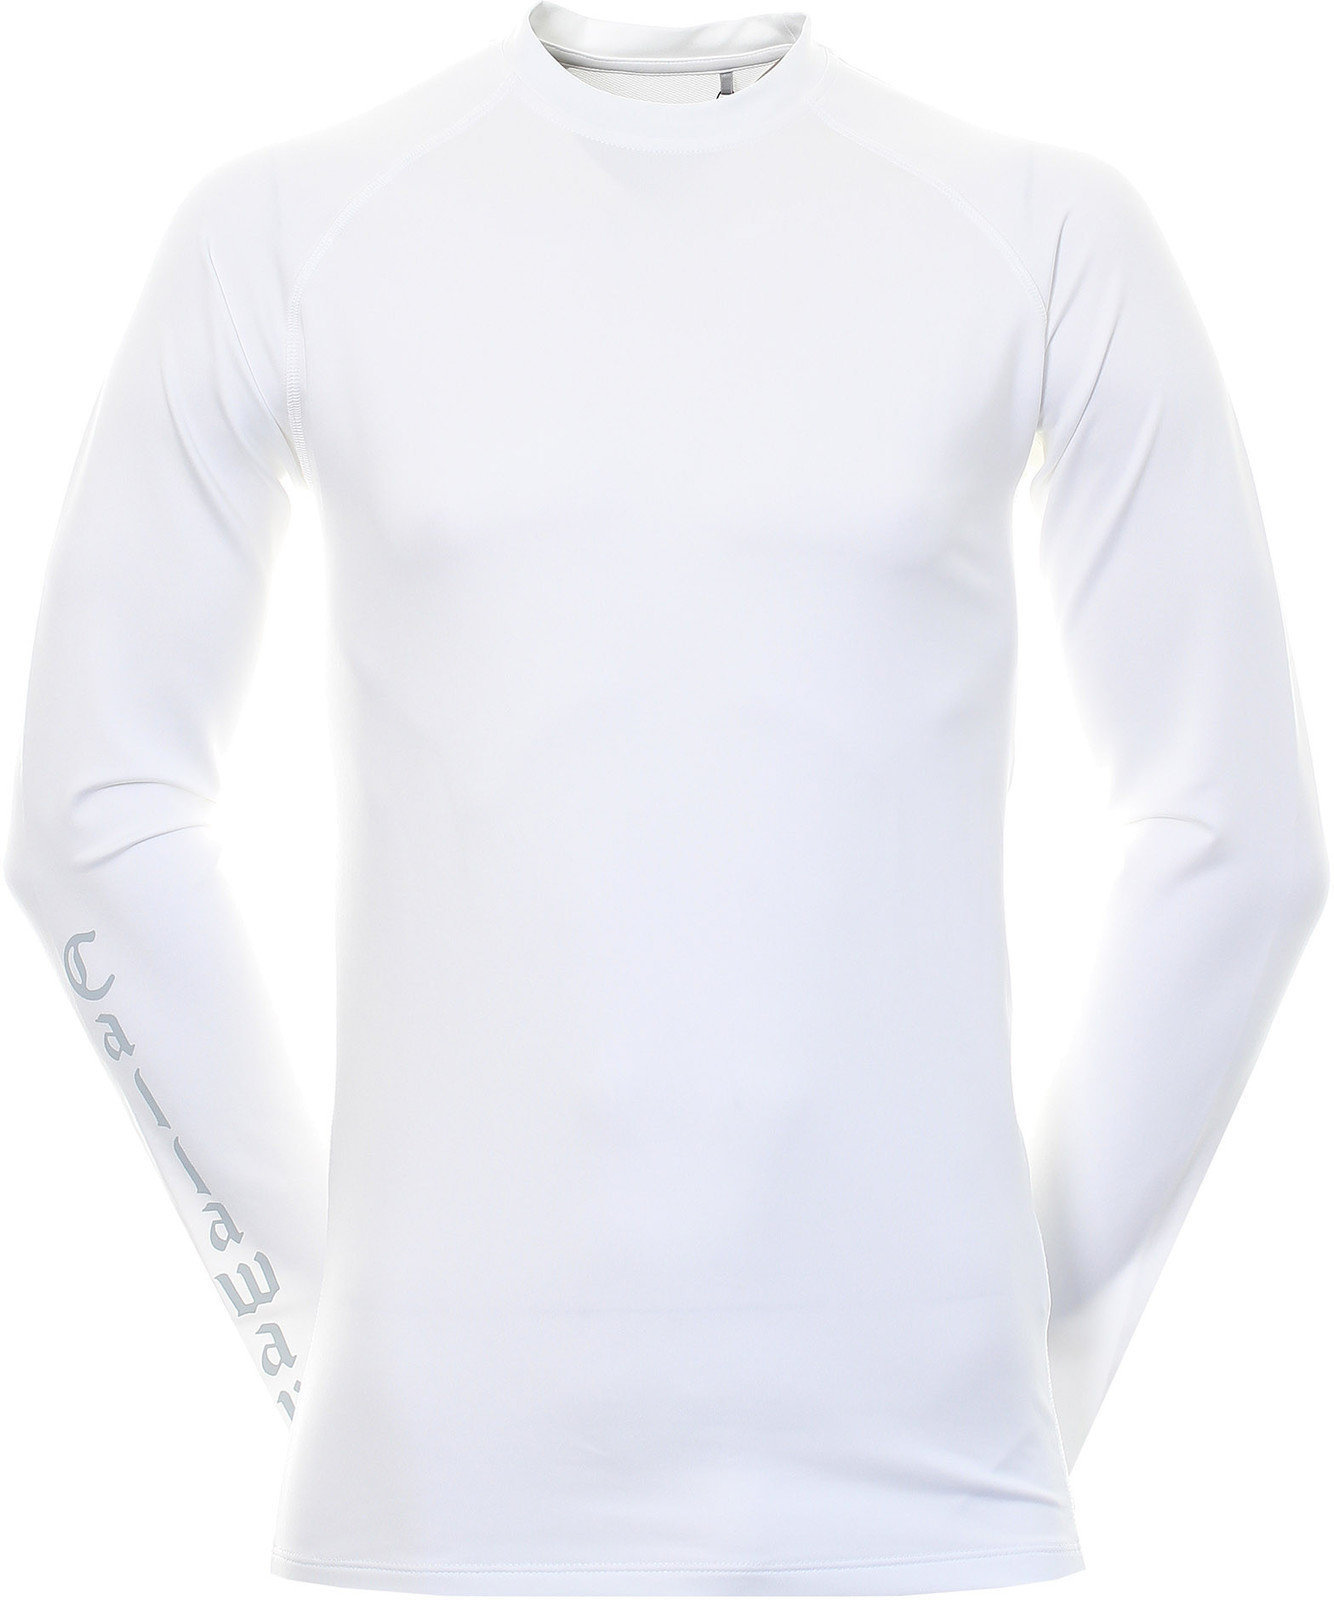 Thermal Clothing Callaway Thermal Bright White S